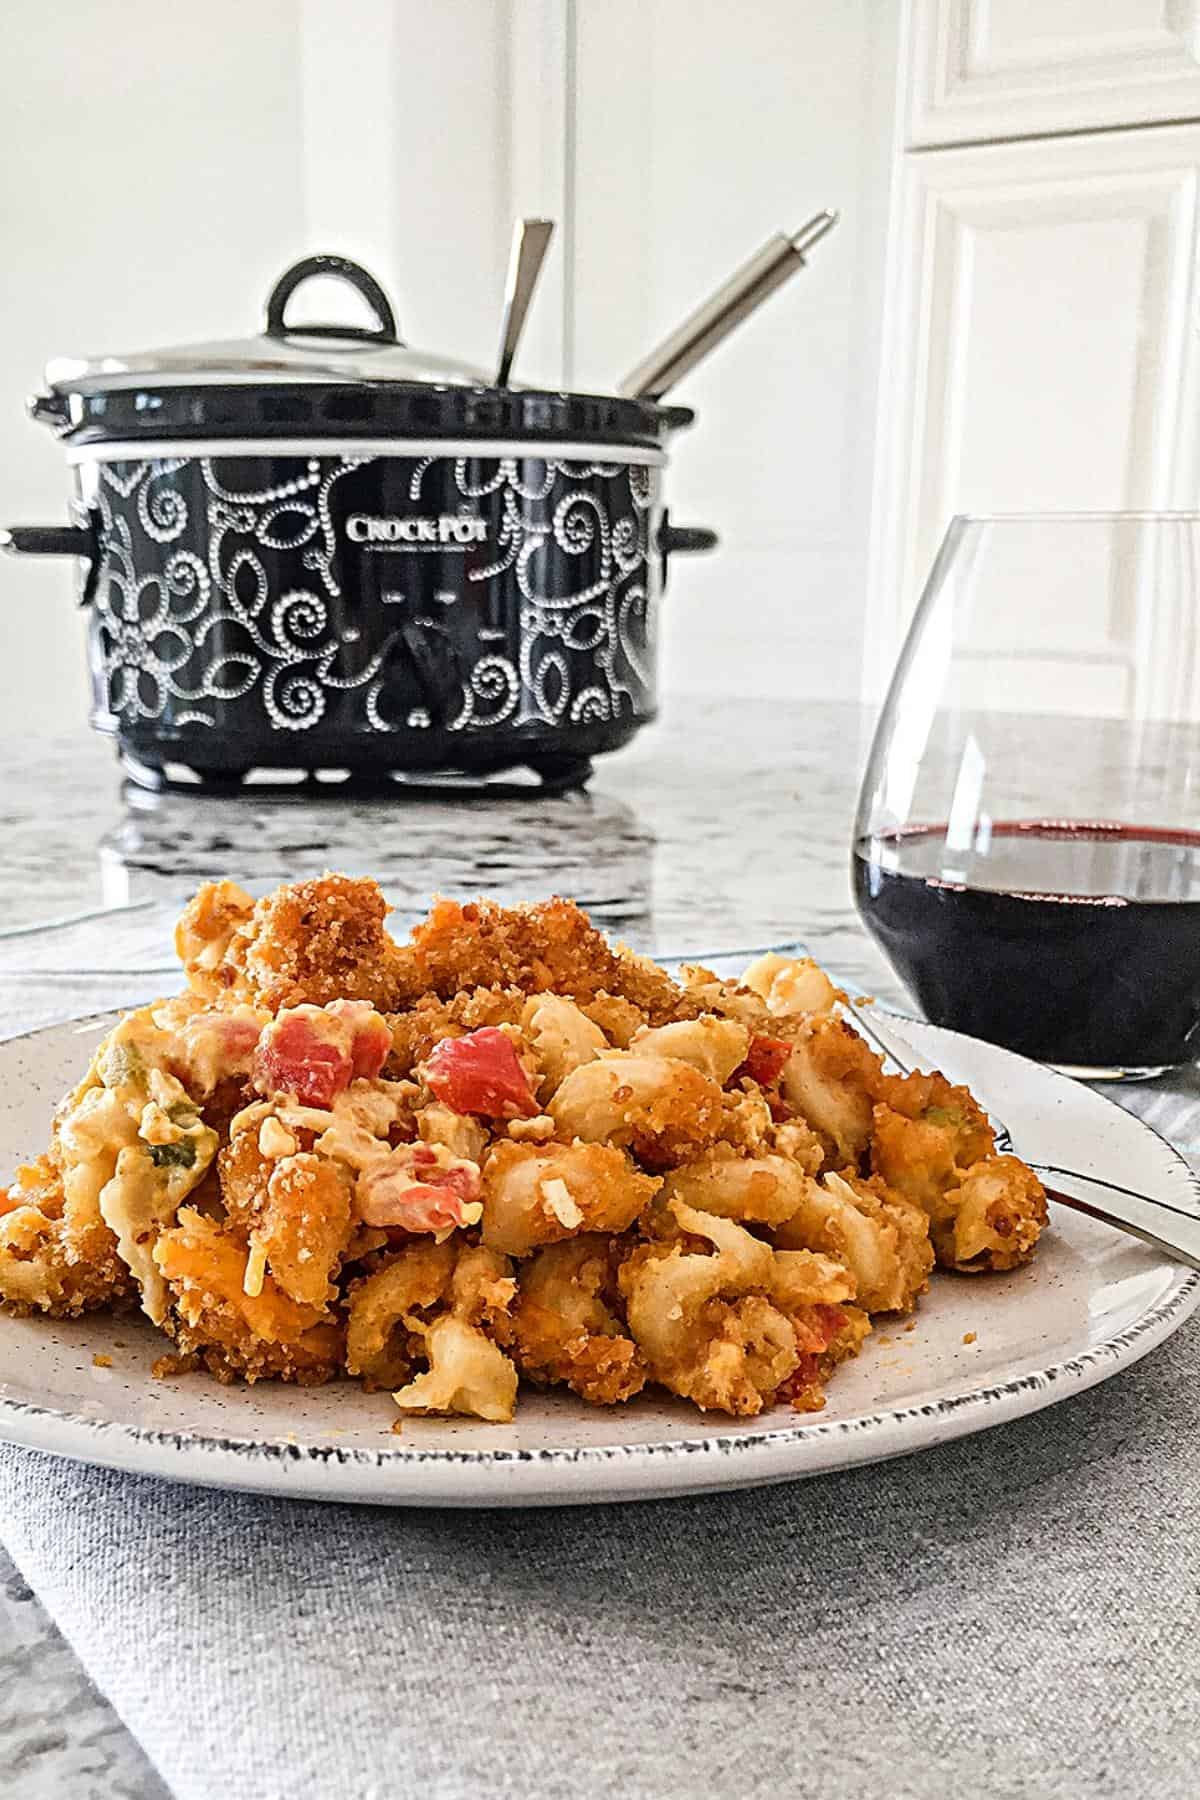 A plate loaded with mac and cheese with a slow cooker in the background.